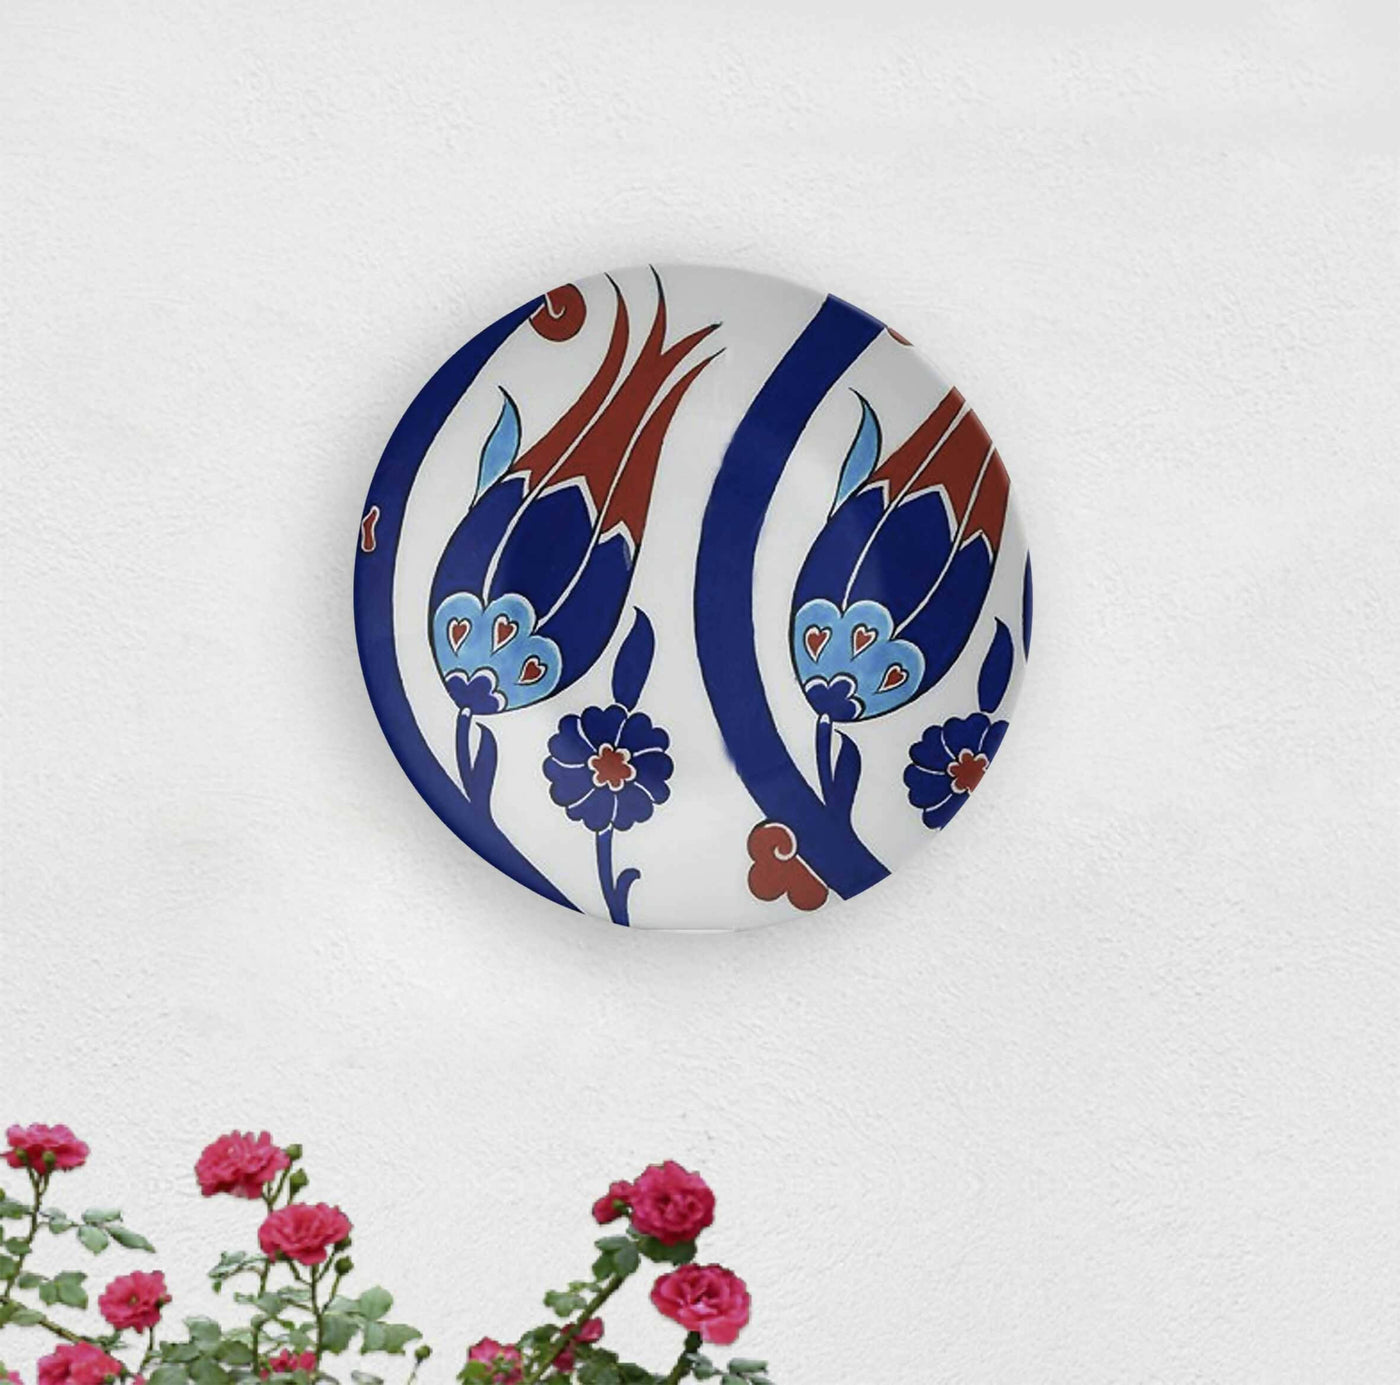 Turkish Rise of Flower Decorative Wall Plate - Wall Decor - 1